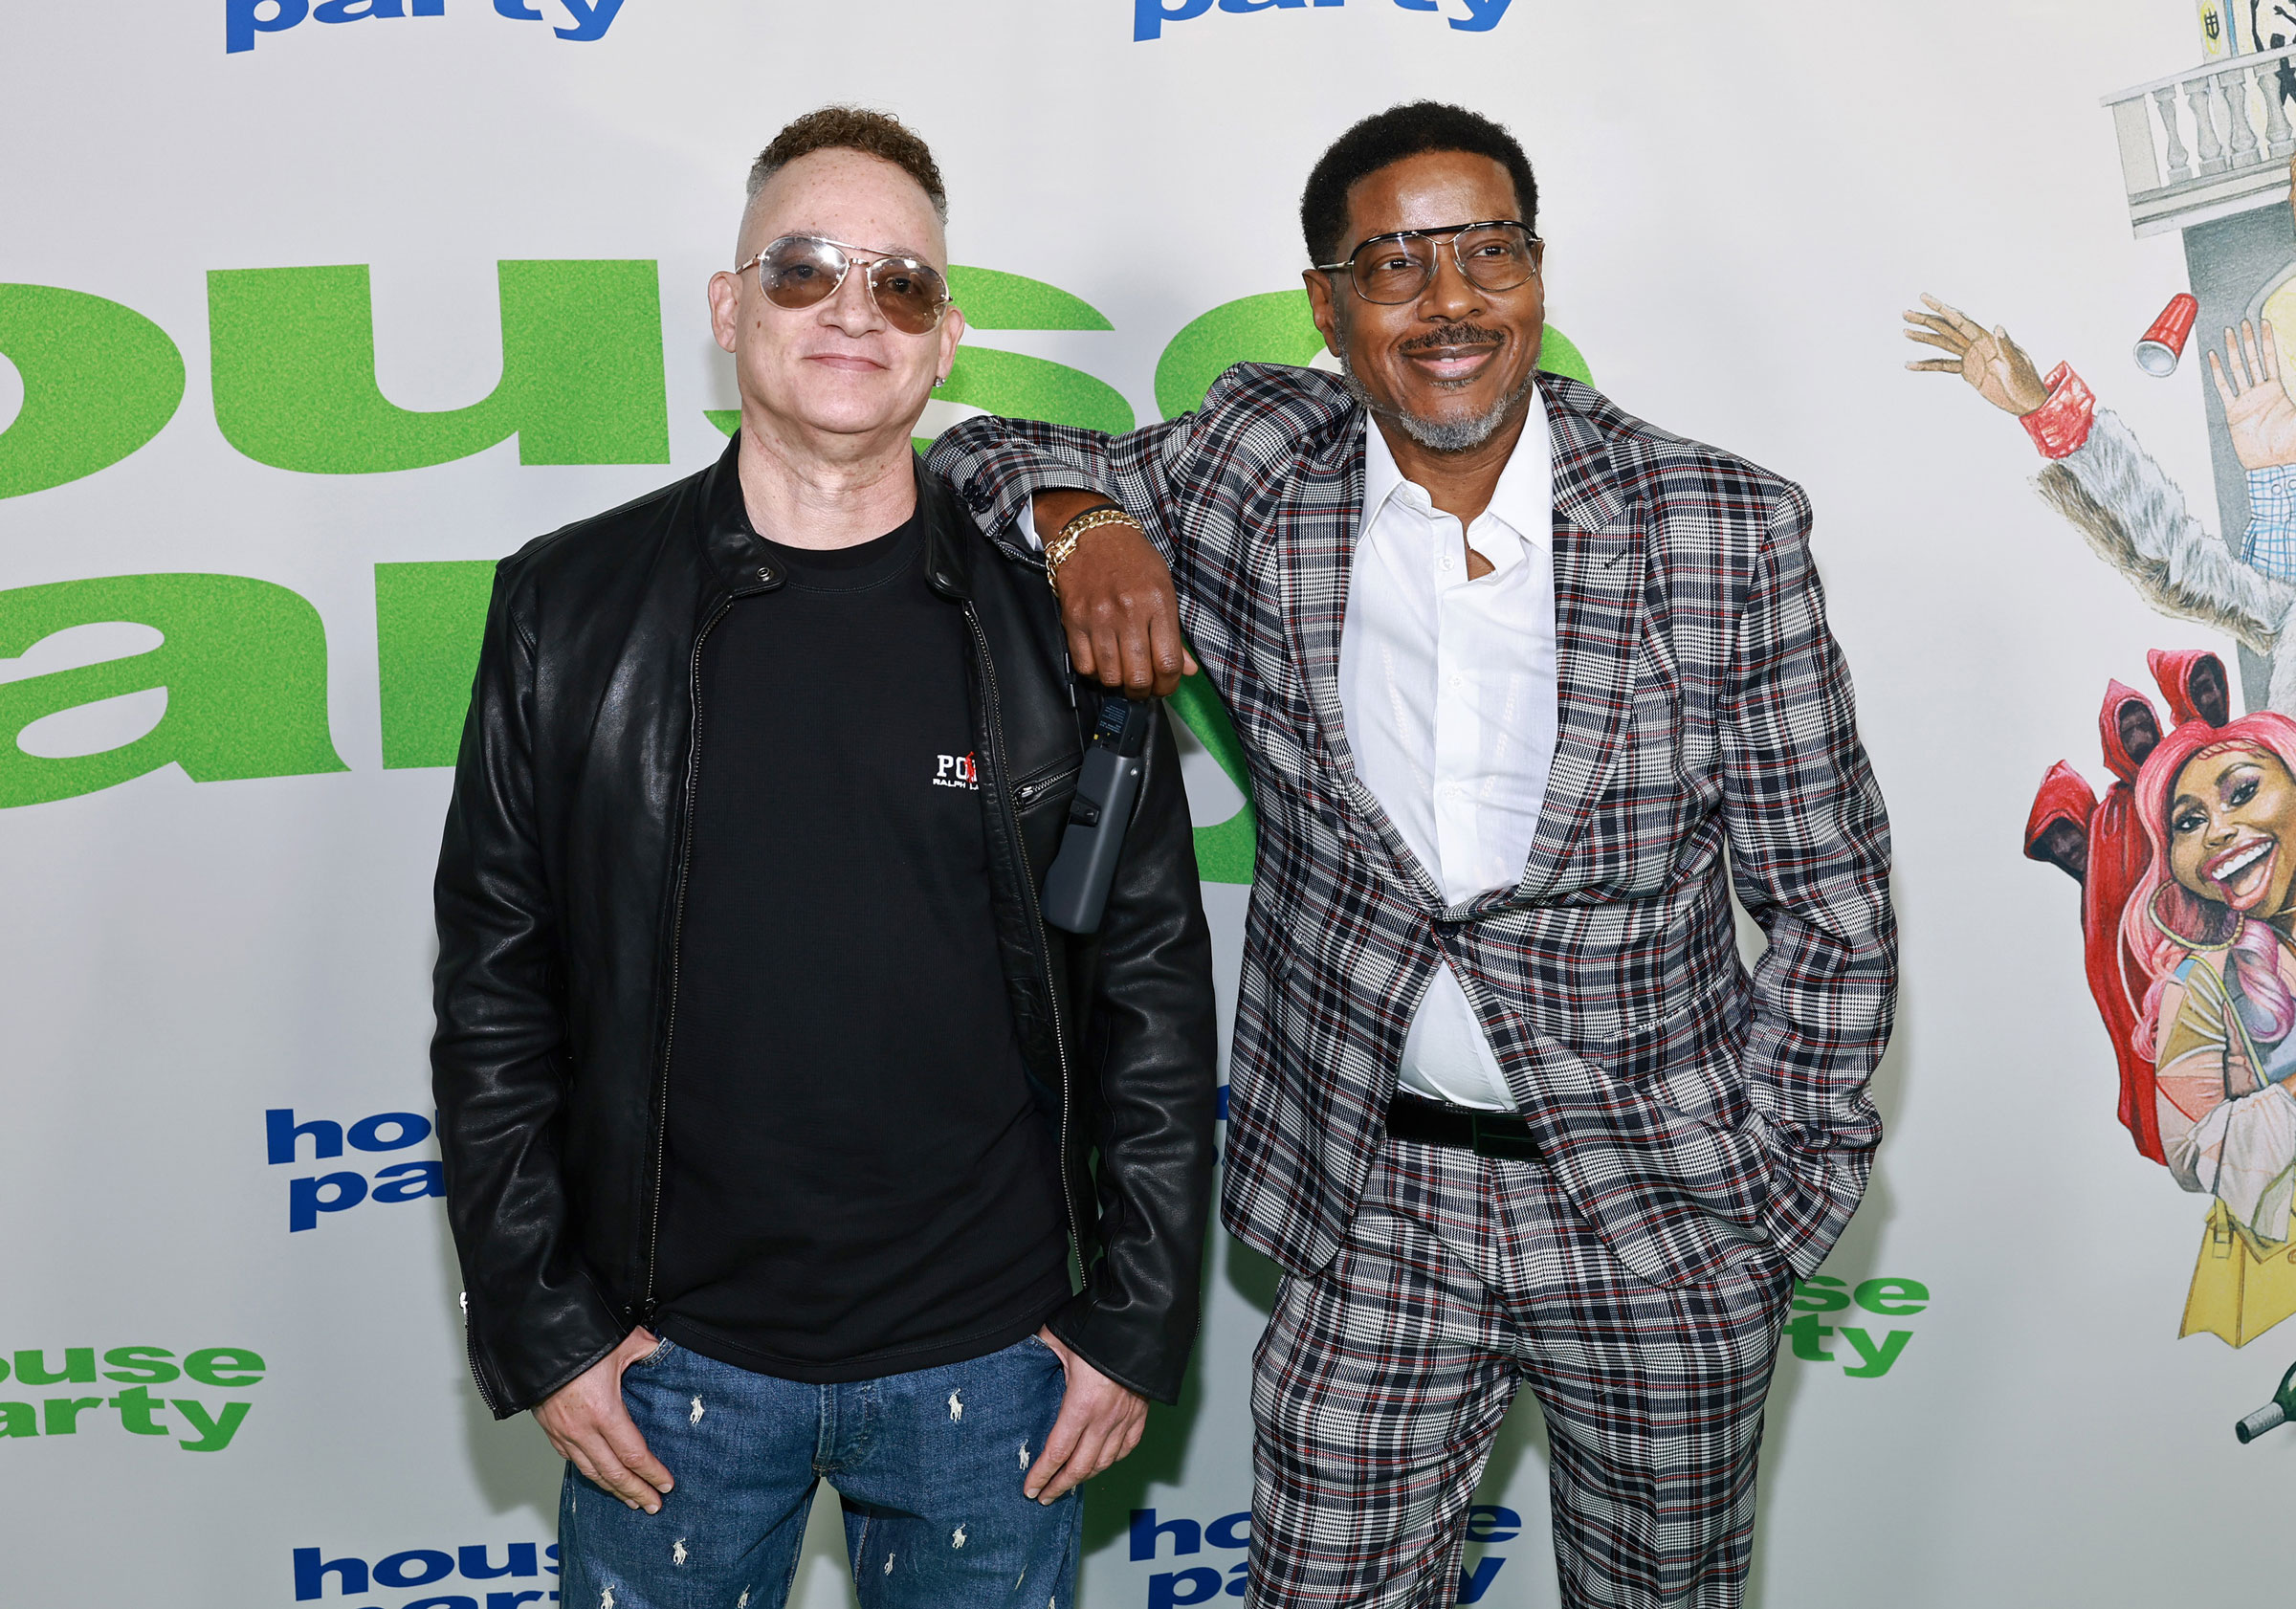 Christopher Reid Christopher Martin of Kid 'n Play attend the Special Red Carpet Screening for New Line Cinema’s “House Party” at TCL Chinese 6 Theatres in Hollywood, Calif., on Jan. 11, 2023.